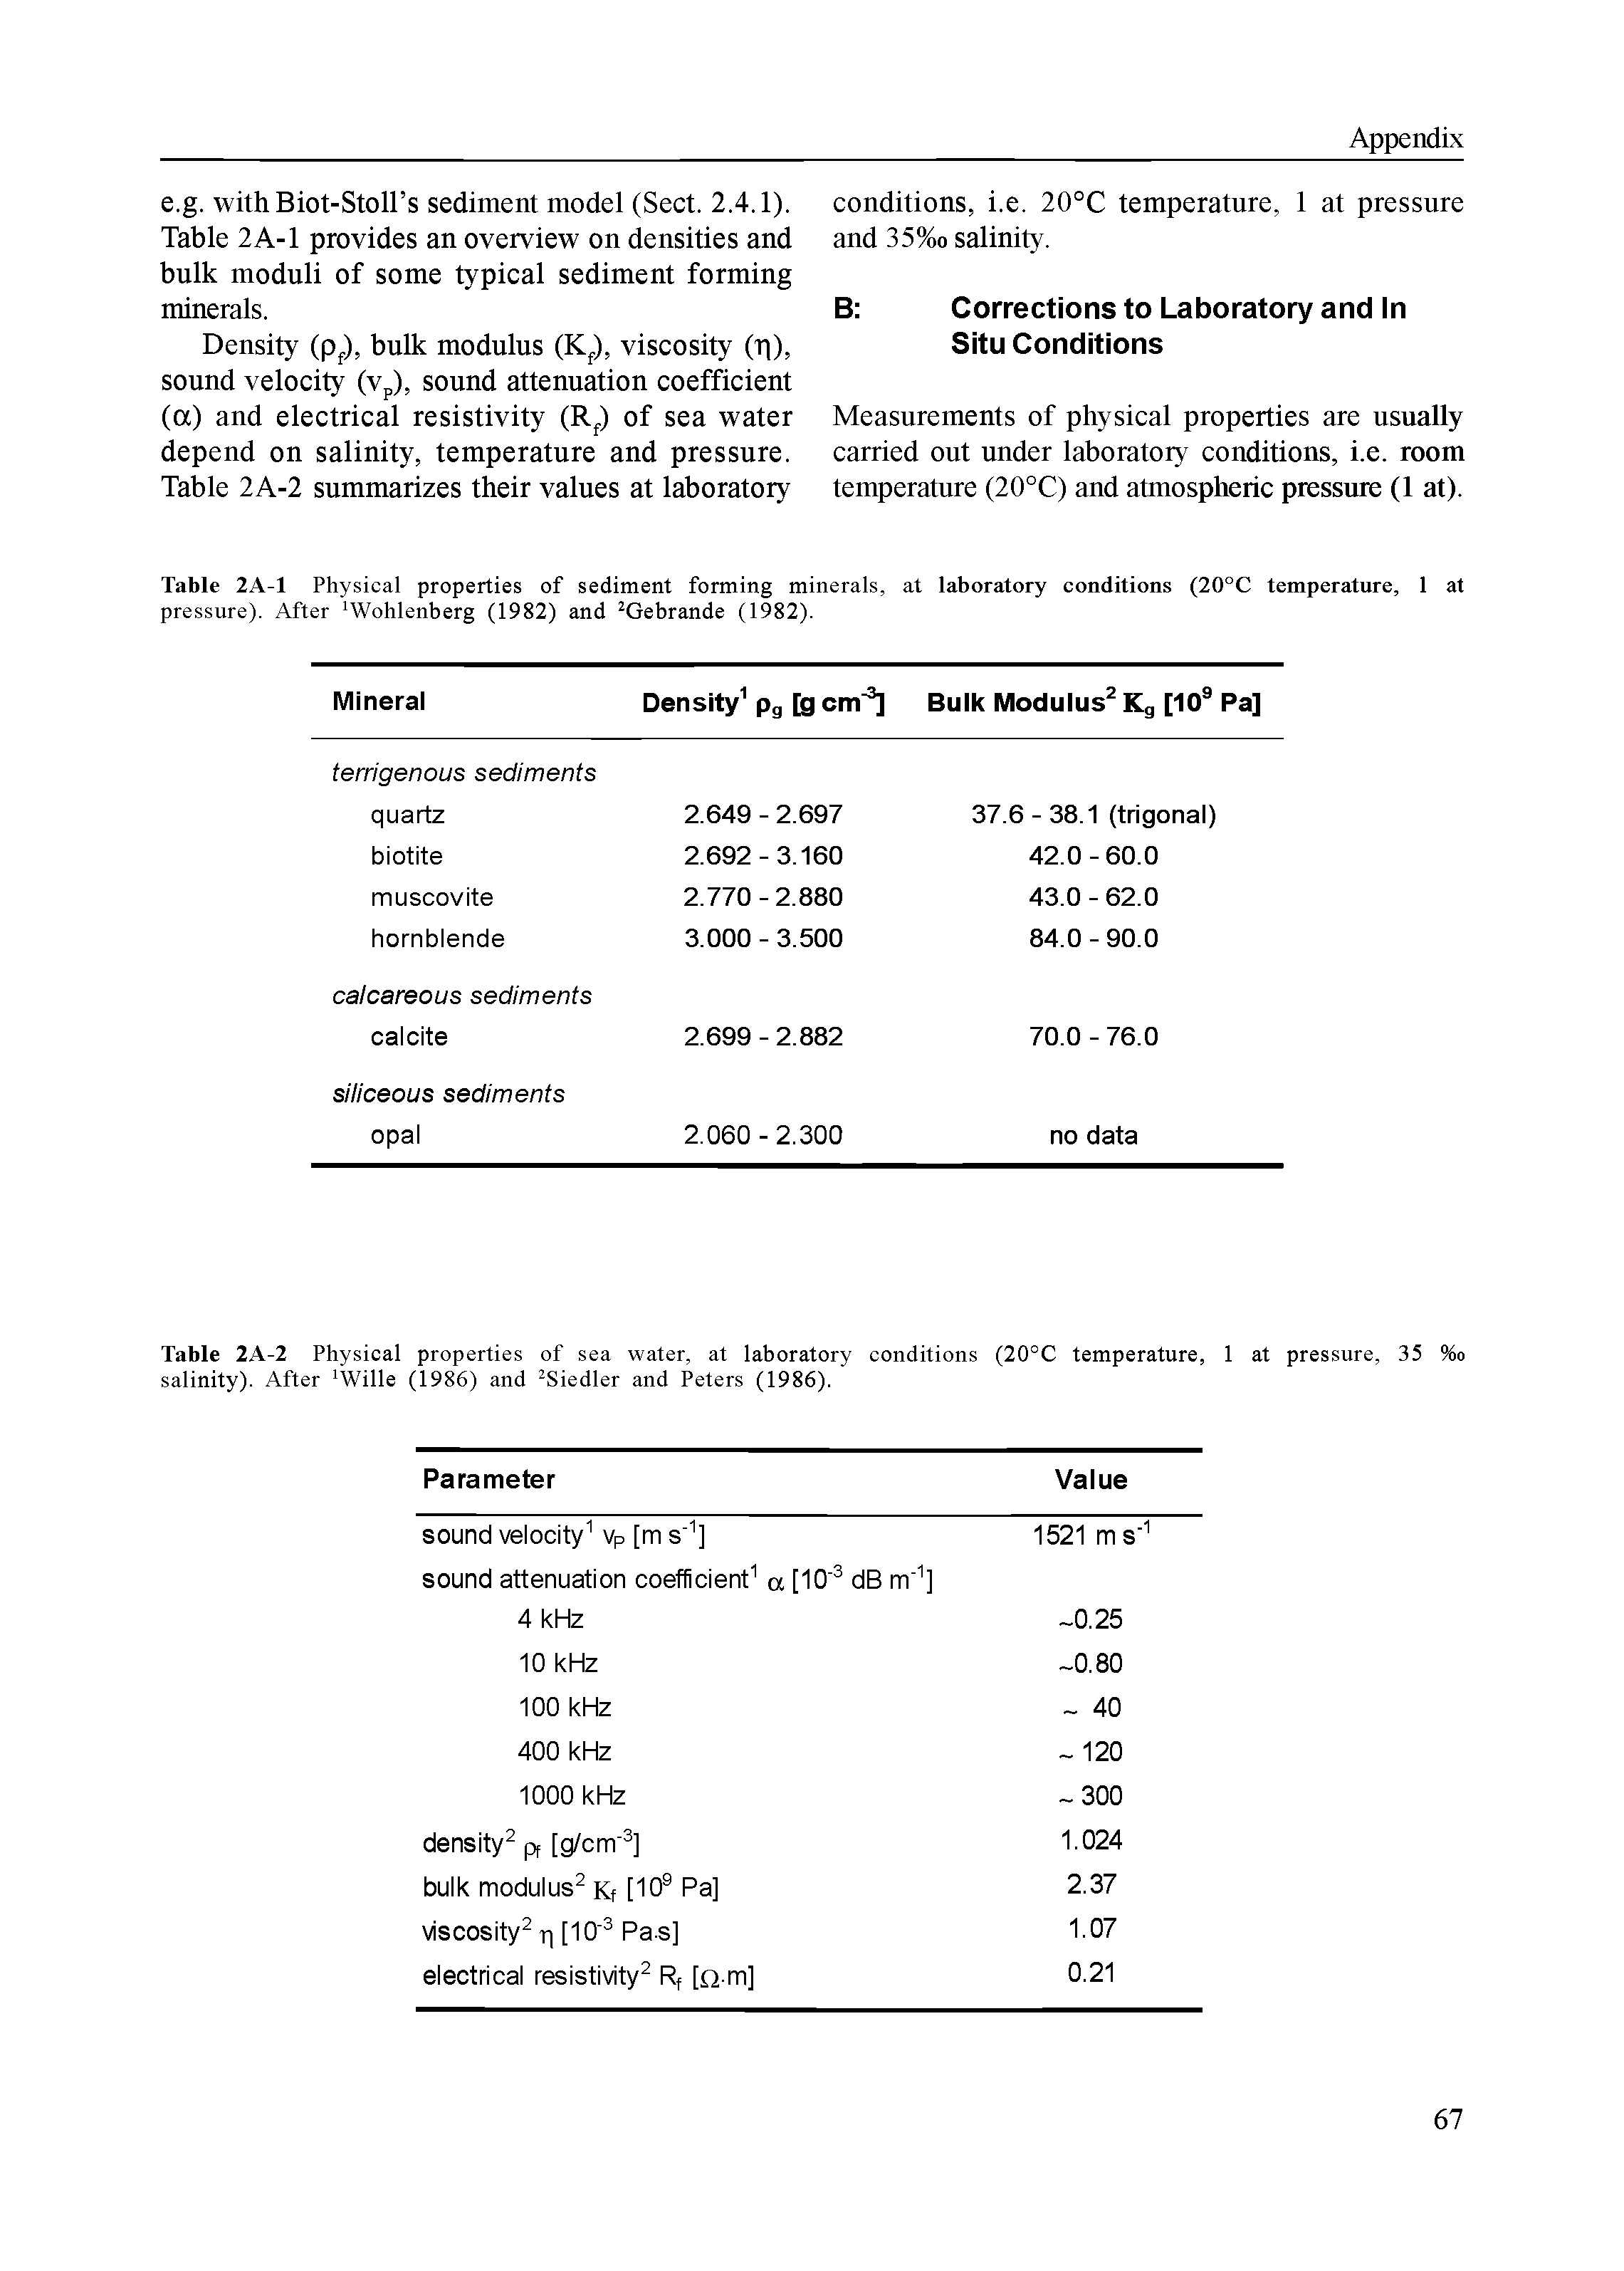 Table 2A-1 Physical properties of sediment forming minerals, at laboratory conditions (20°C temperature, 1 at pressure). After Wohlenberg (1982) and Gebrande (1982).